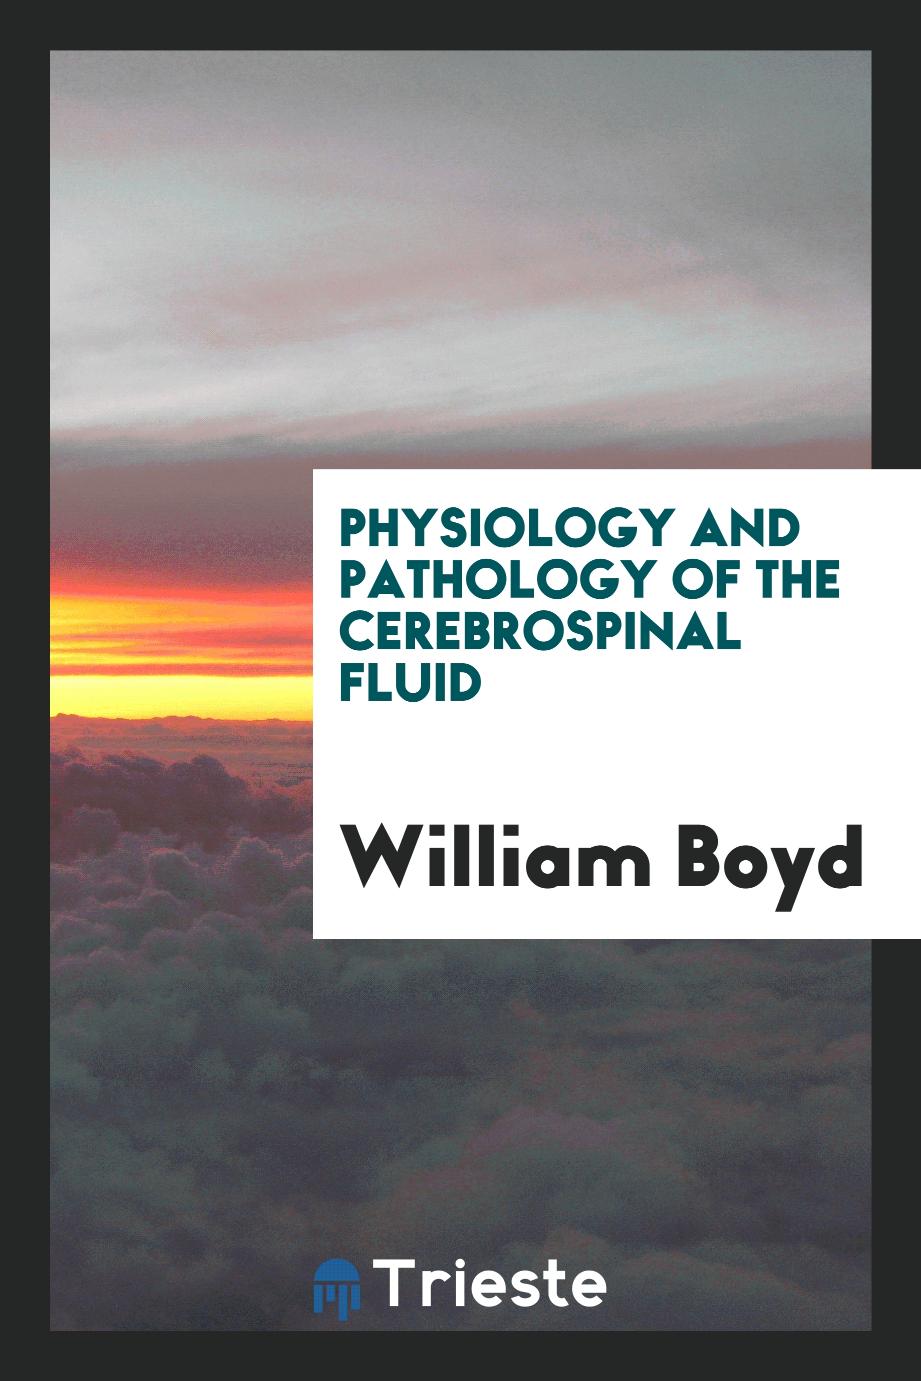 Physiology and pathology of the cerebrospinal fluid